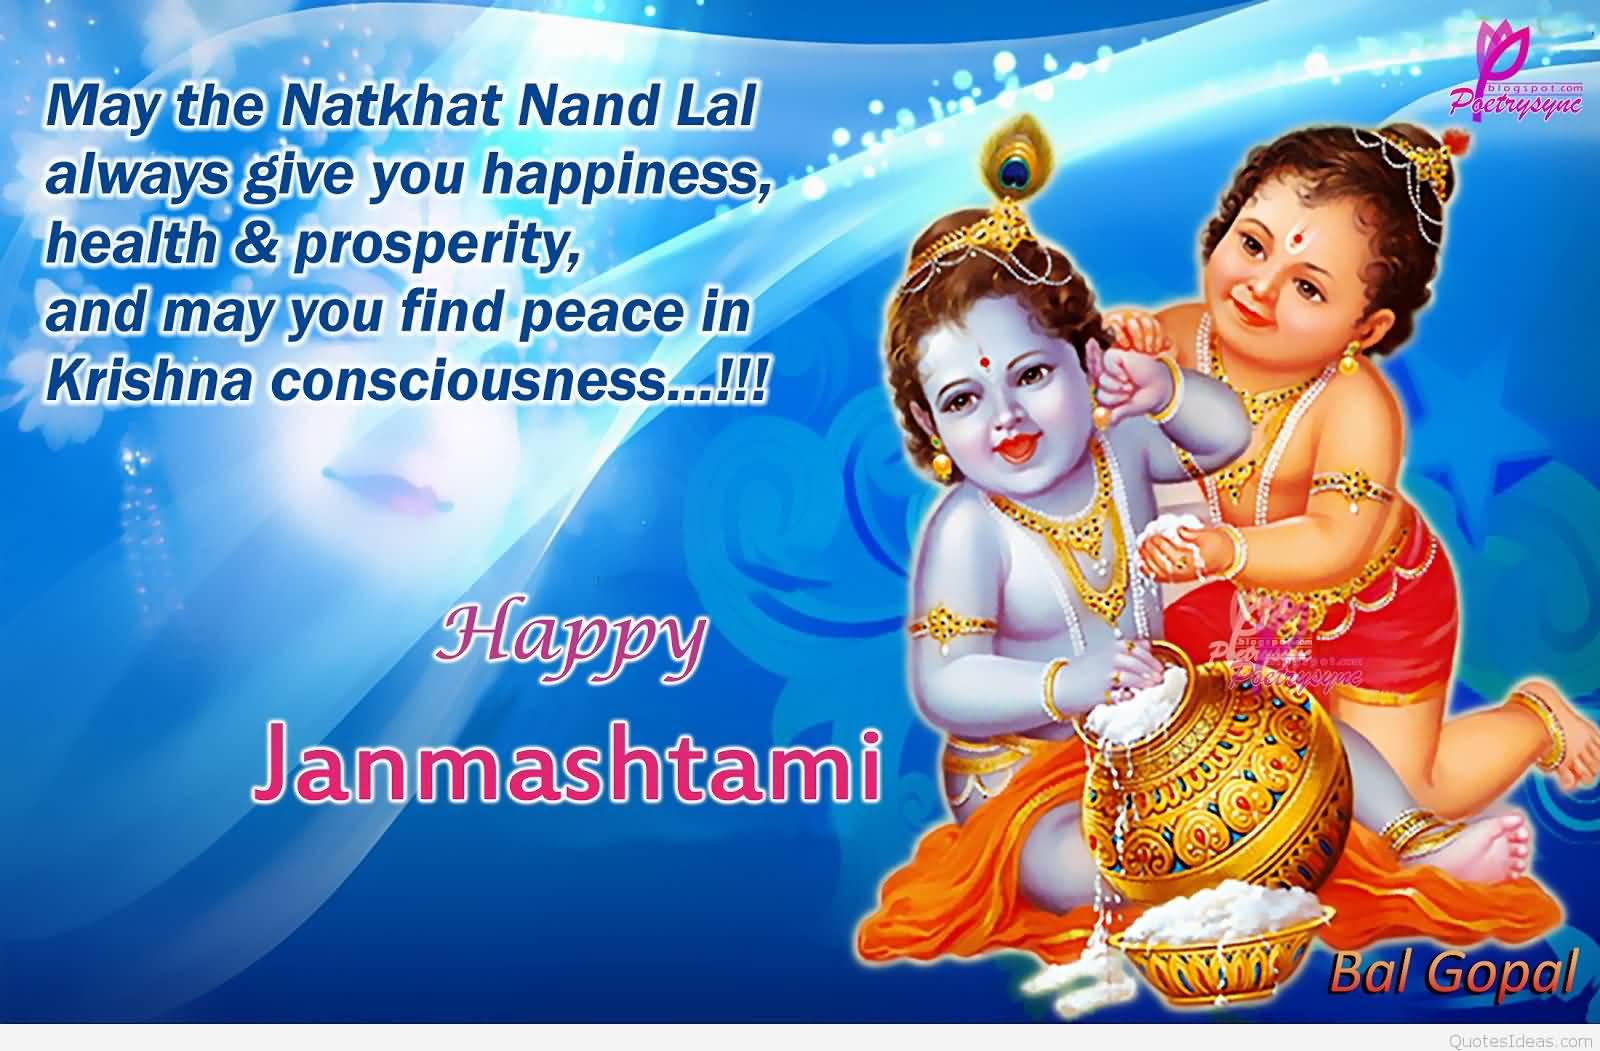 May The Natkhat Nand Lal Always Give You Happiness, Health & Prosperity And May You Find Peace In Krishna Consciousness Happy Janmashtami